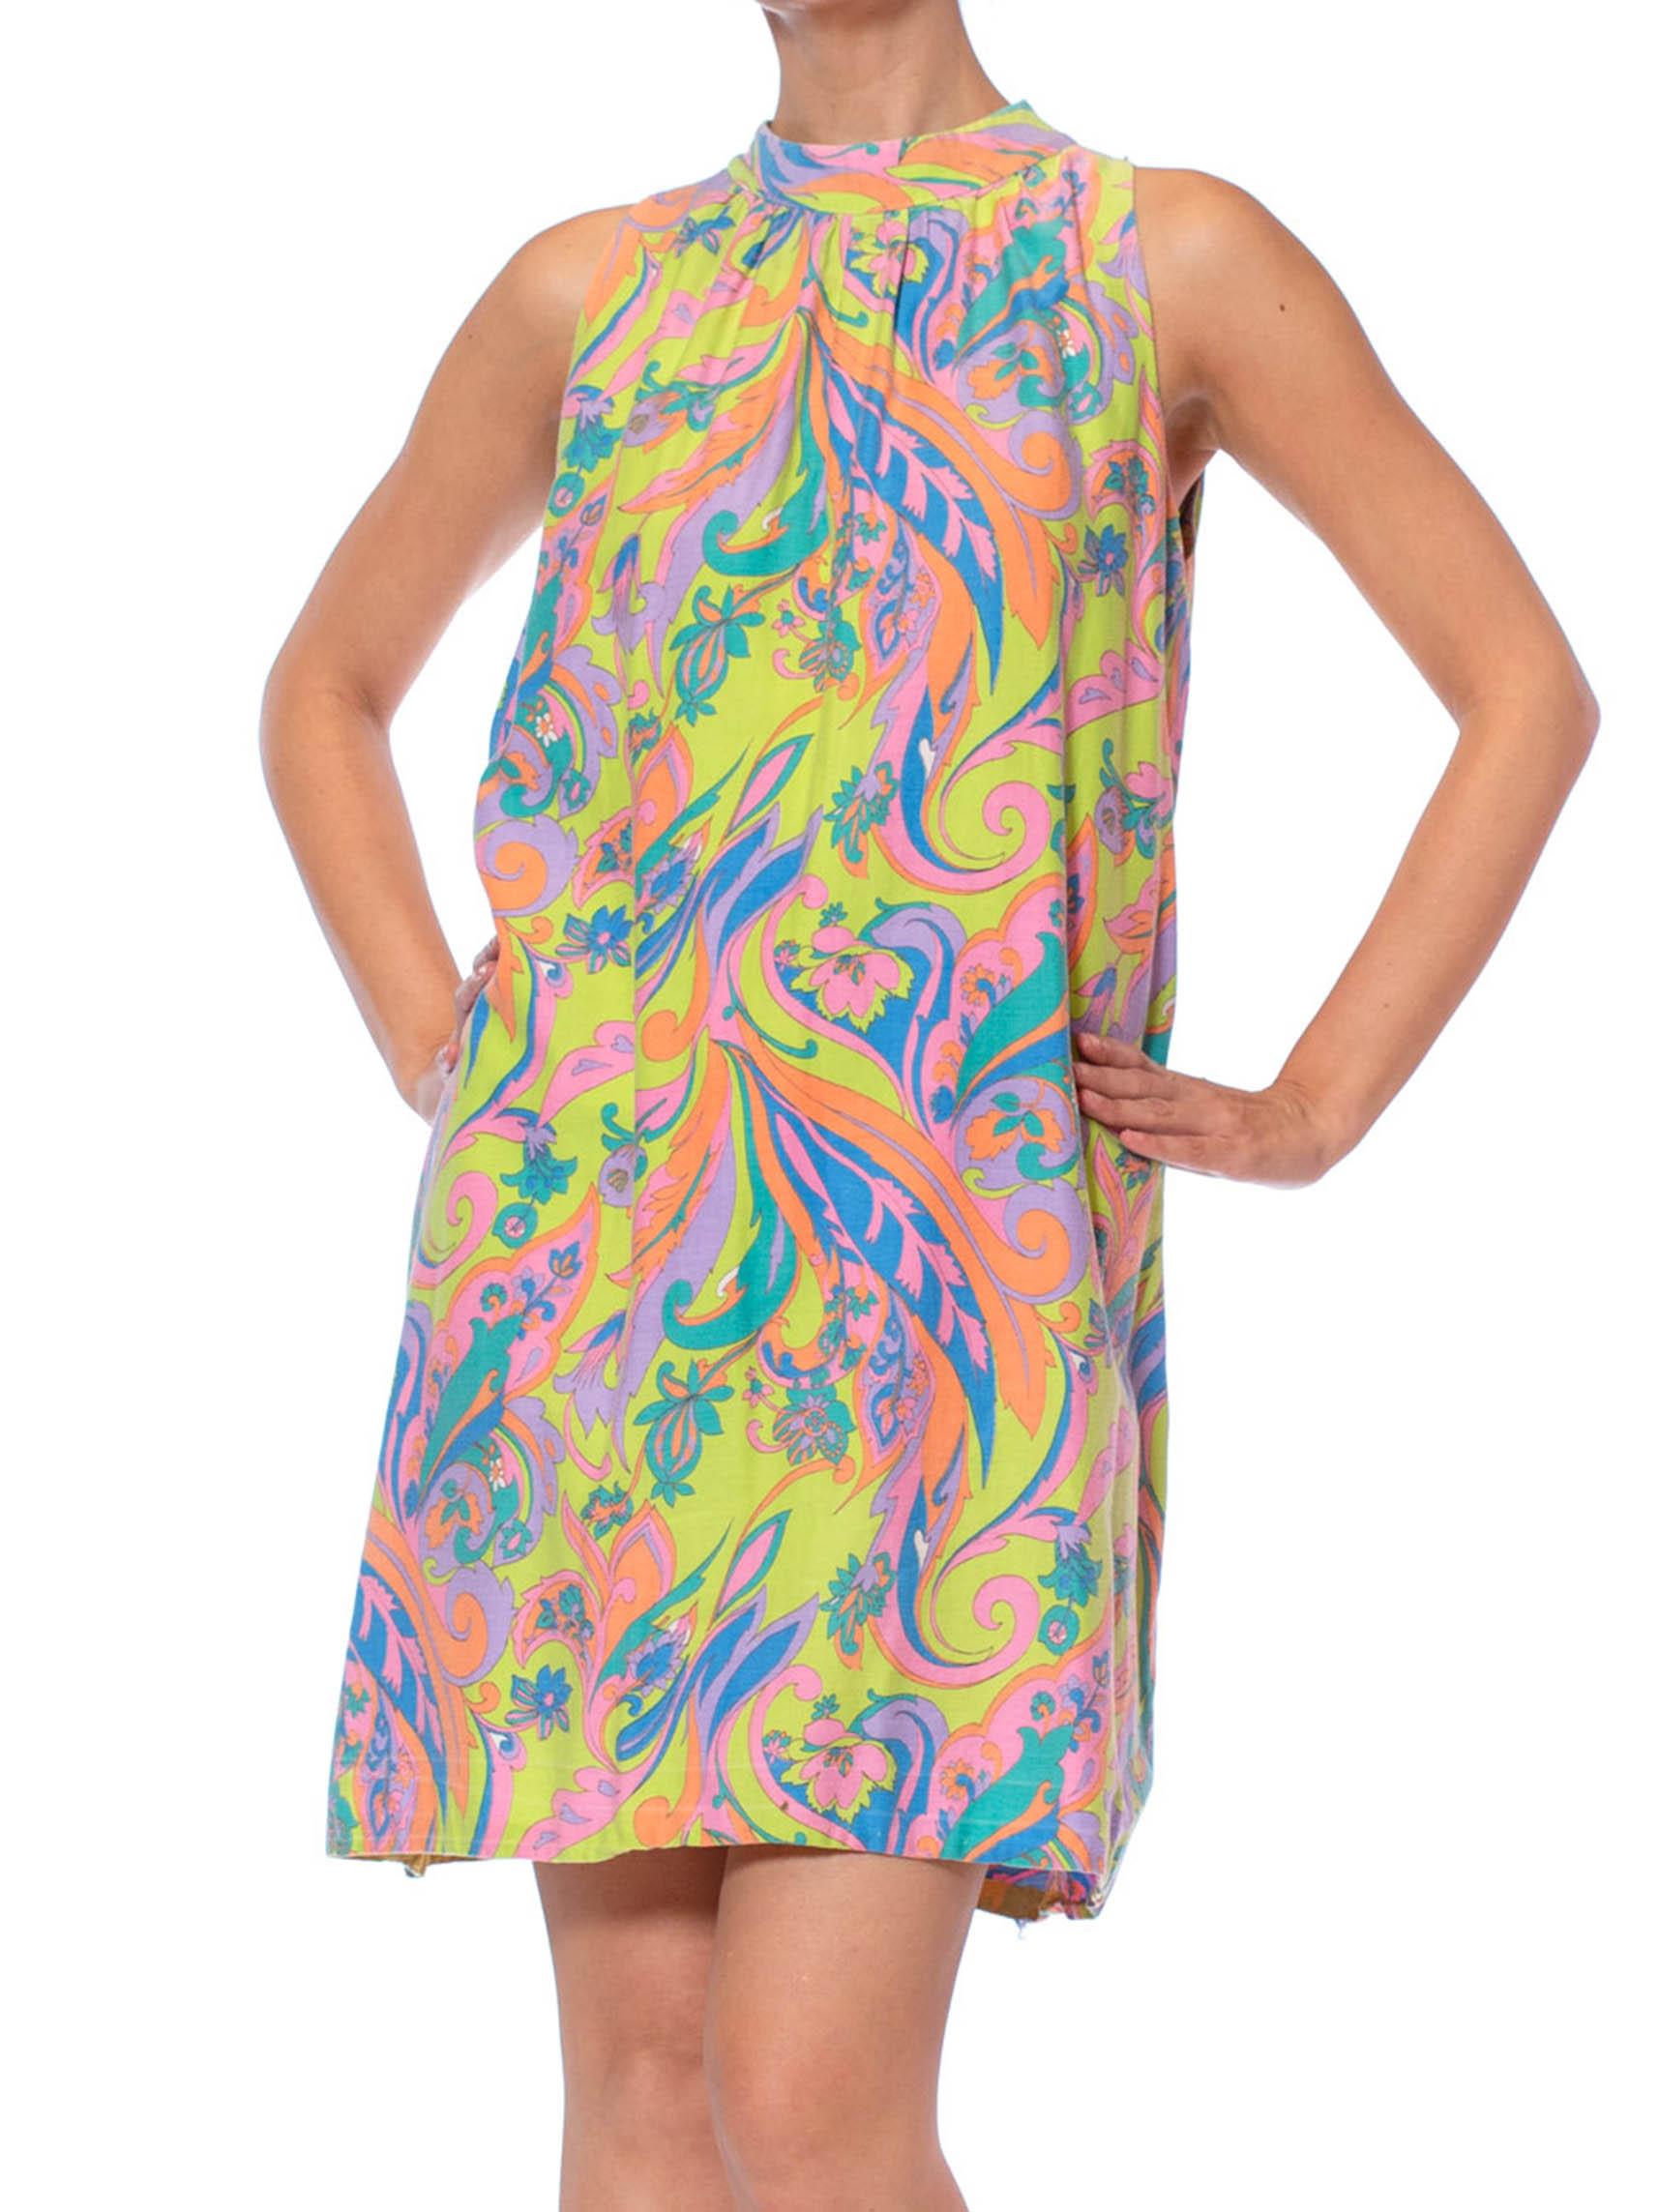 Women's 1960S Lime Green Psychedelic Cotton Mod Shift Dress For Sale